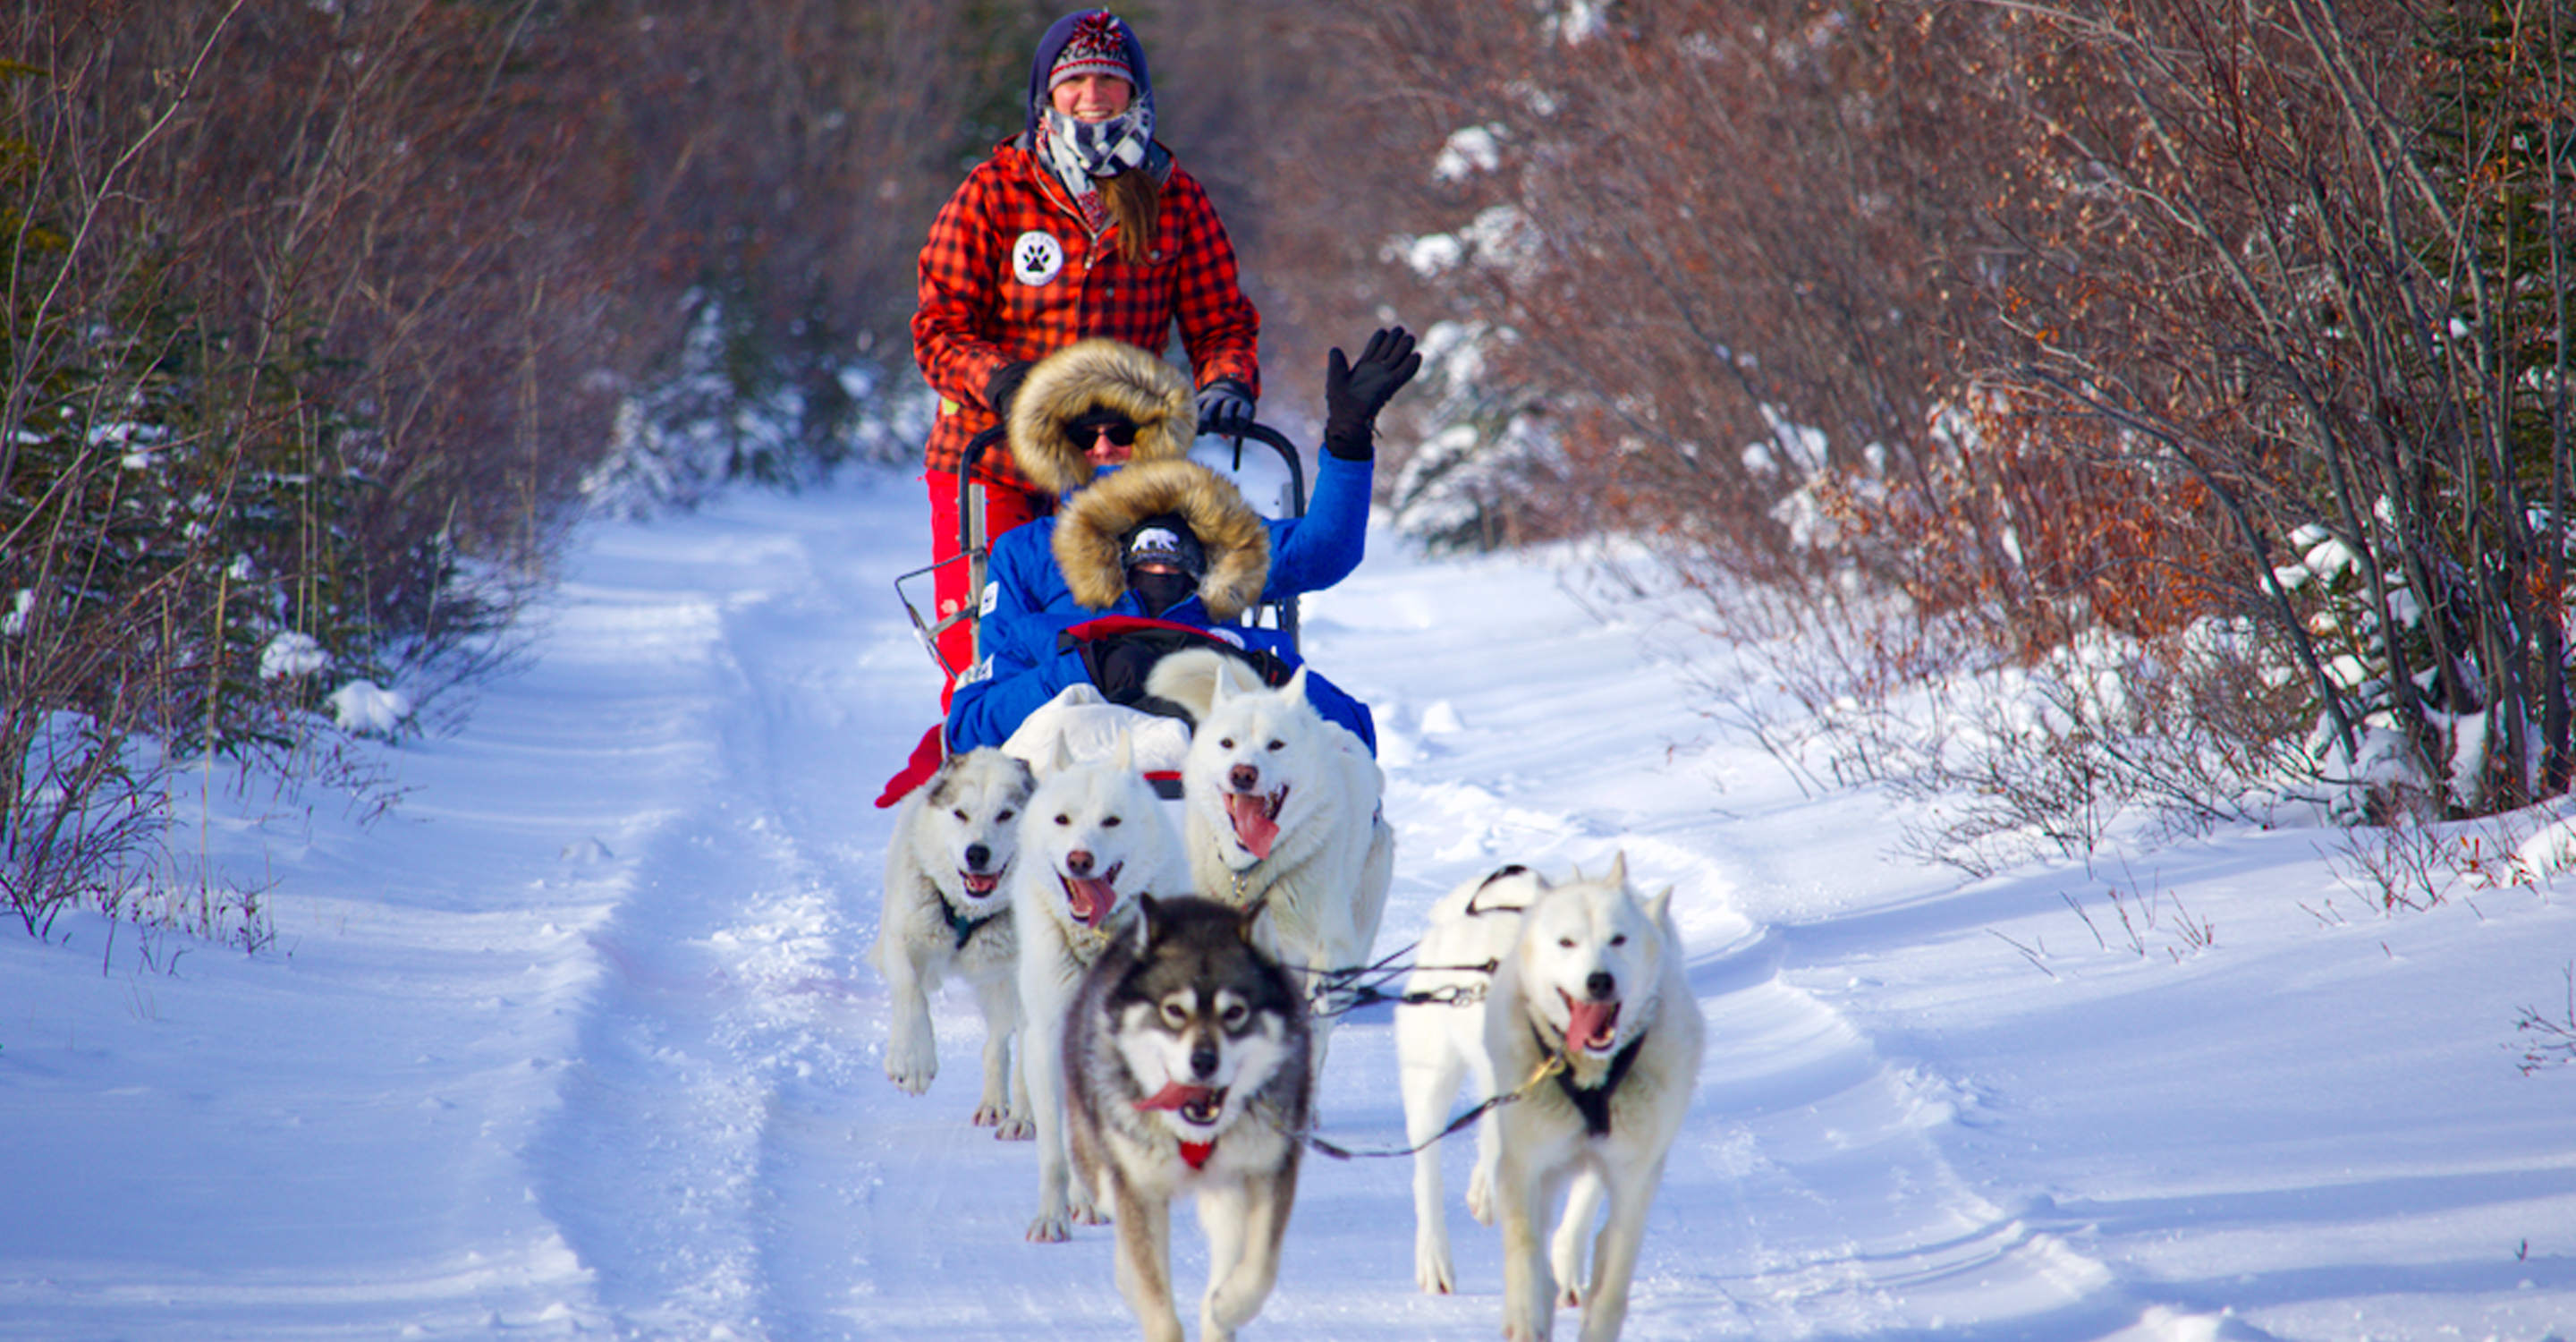 Natural Habitat Adventures travelers go for a ride in a dogsled in Churchill, Manitoba, Canada